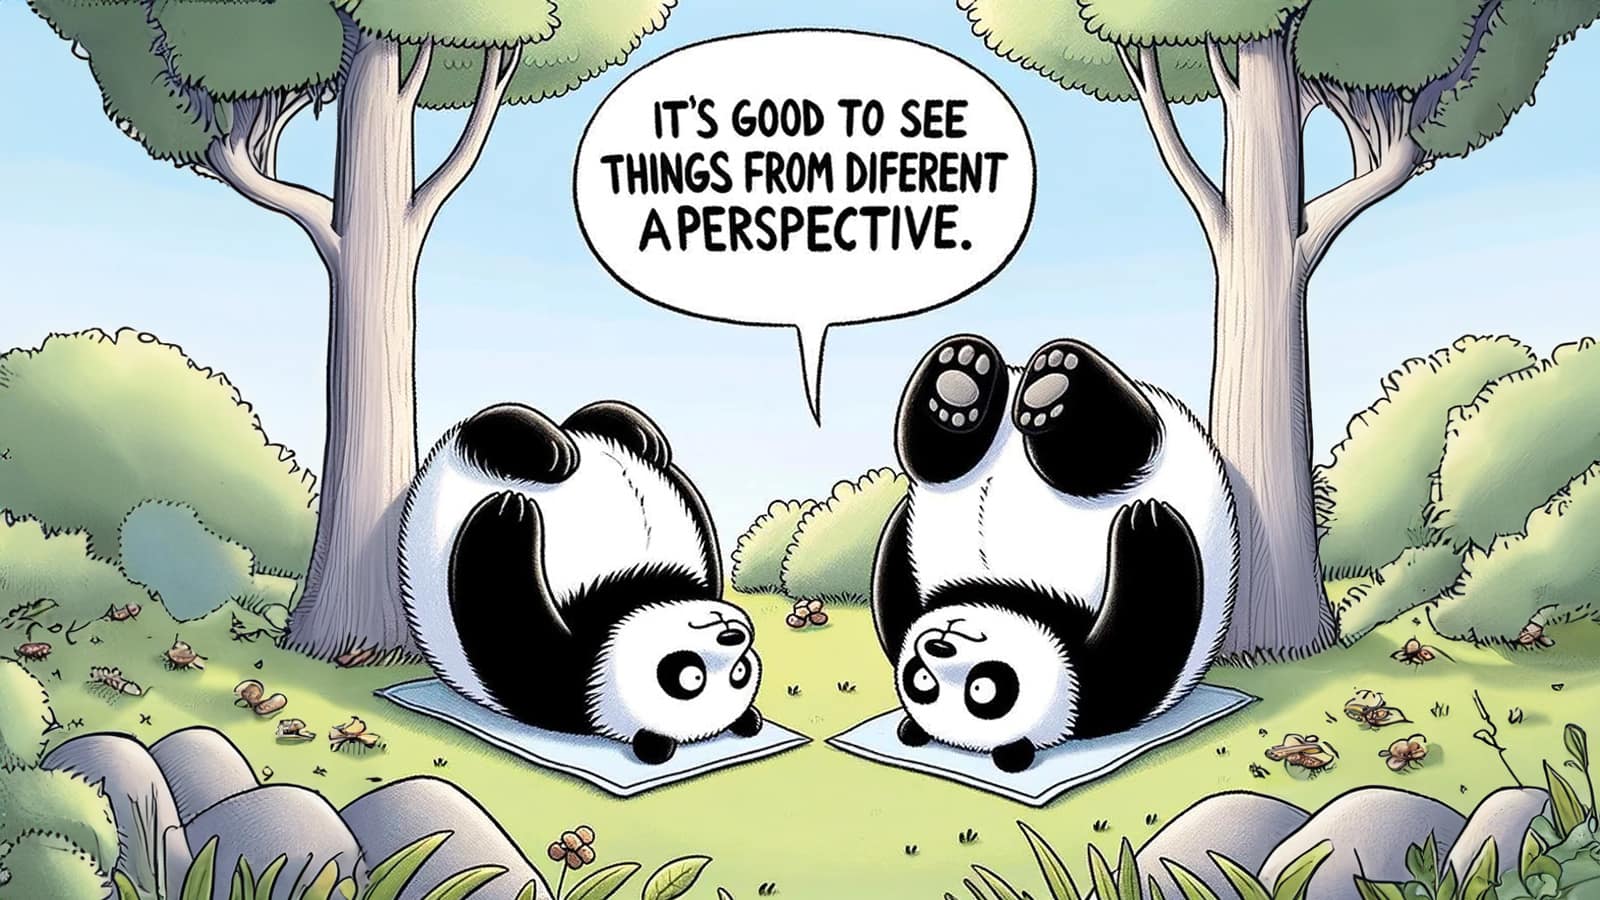 It is good to see things differently to pandas cartoon looking at the world upside down